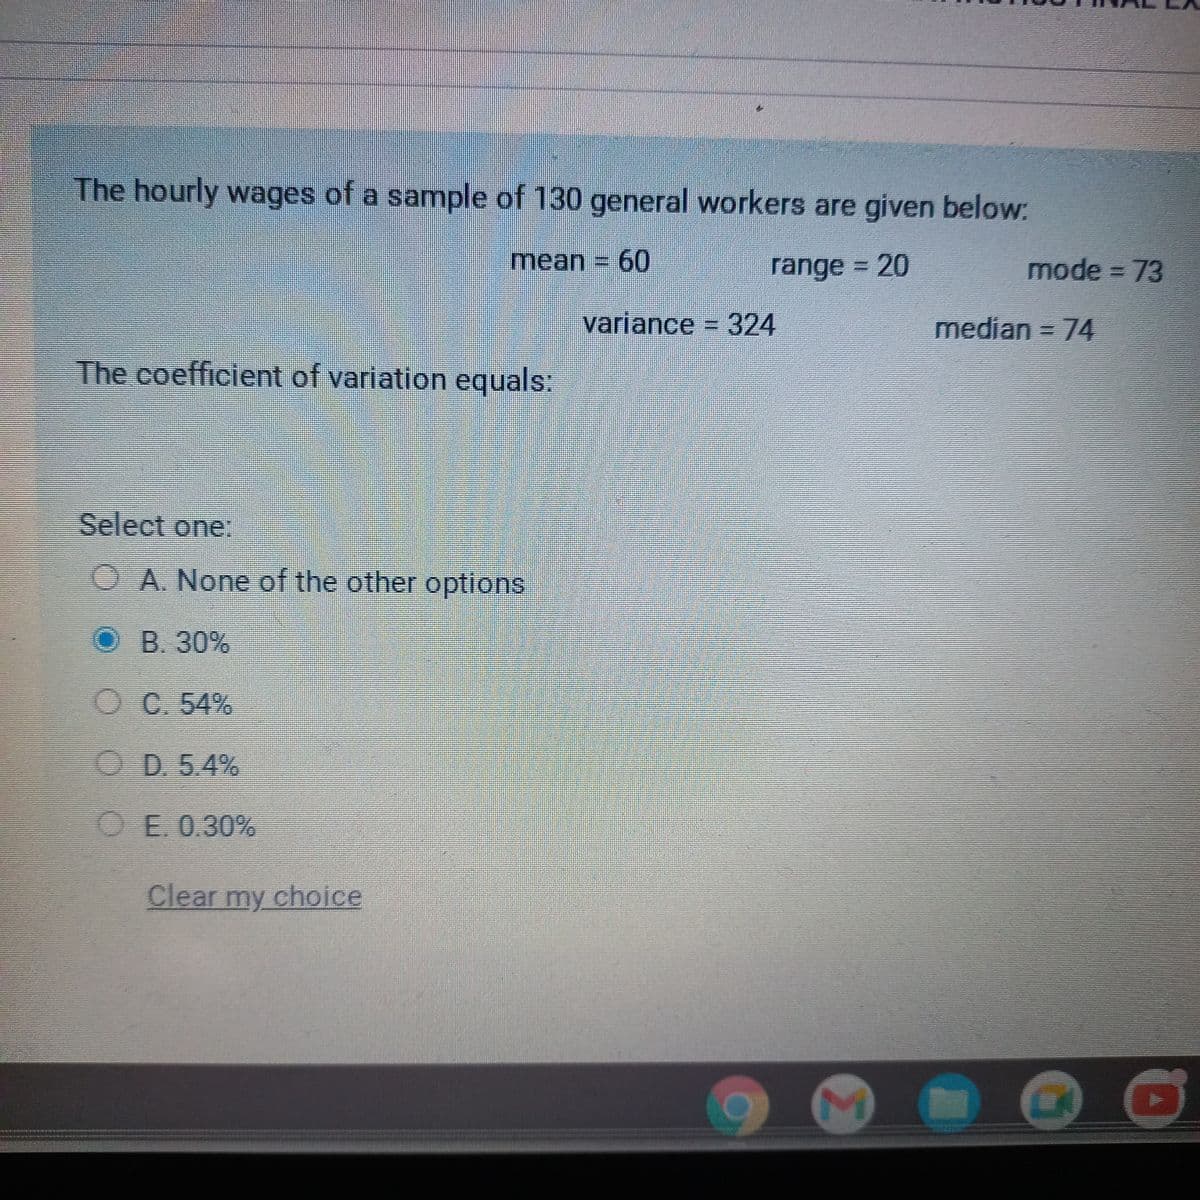 The hourly wages of a sample of 130 general workers are given below:
mean = 60
range = 20
The coefficient of variation equals:
Select one:
-
A. None of the other options
O B. 30%
OC. 54%
D. 5.4%
E. 0.30%
Clear my choice
variance = 324
M
mode = 73
median = 74